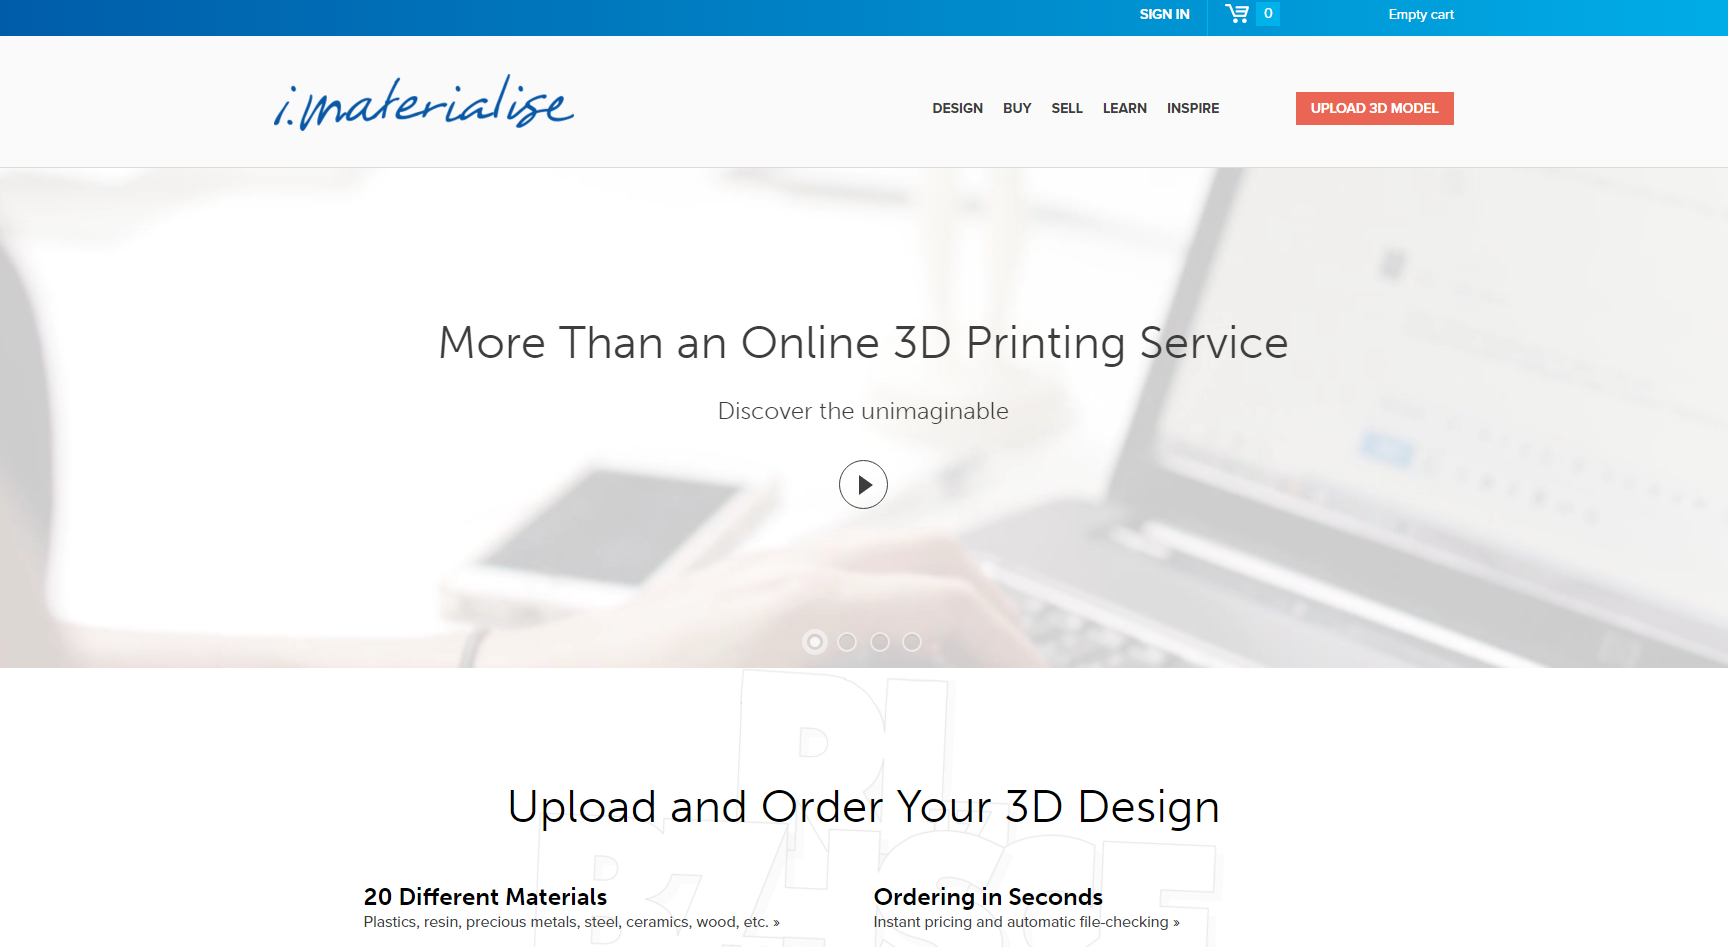 Best 3D printing service, iMaterialize